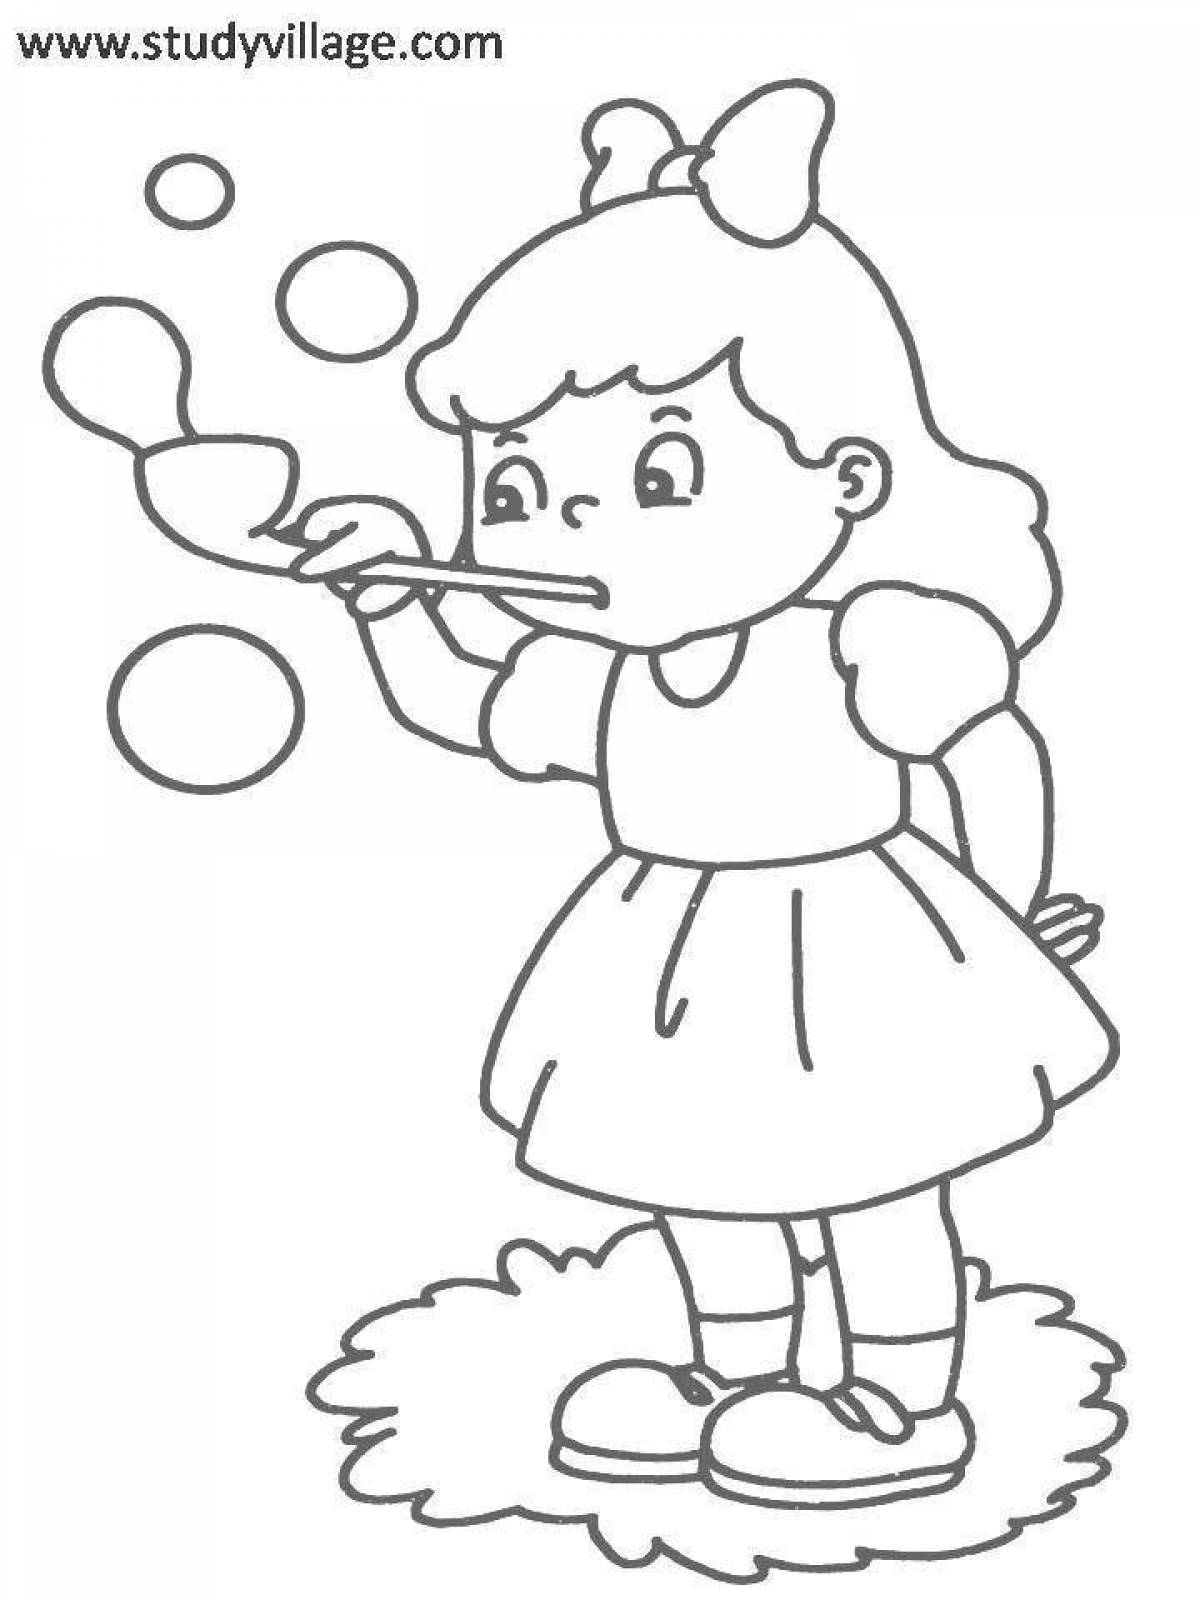 Poppy playtime adorable coloring page